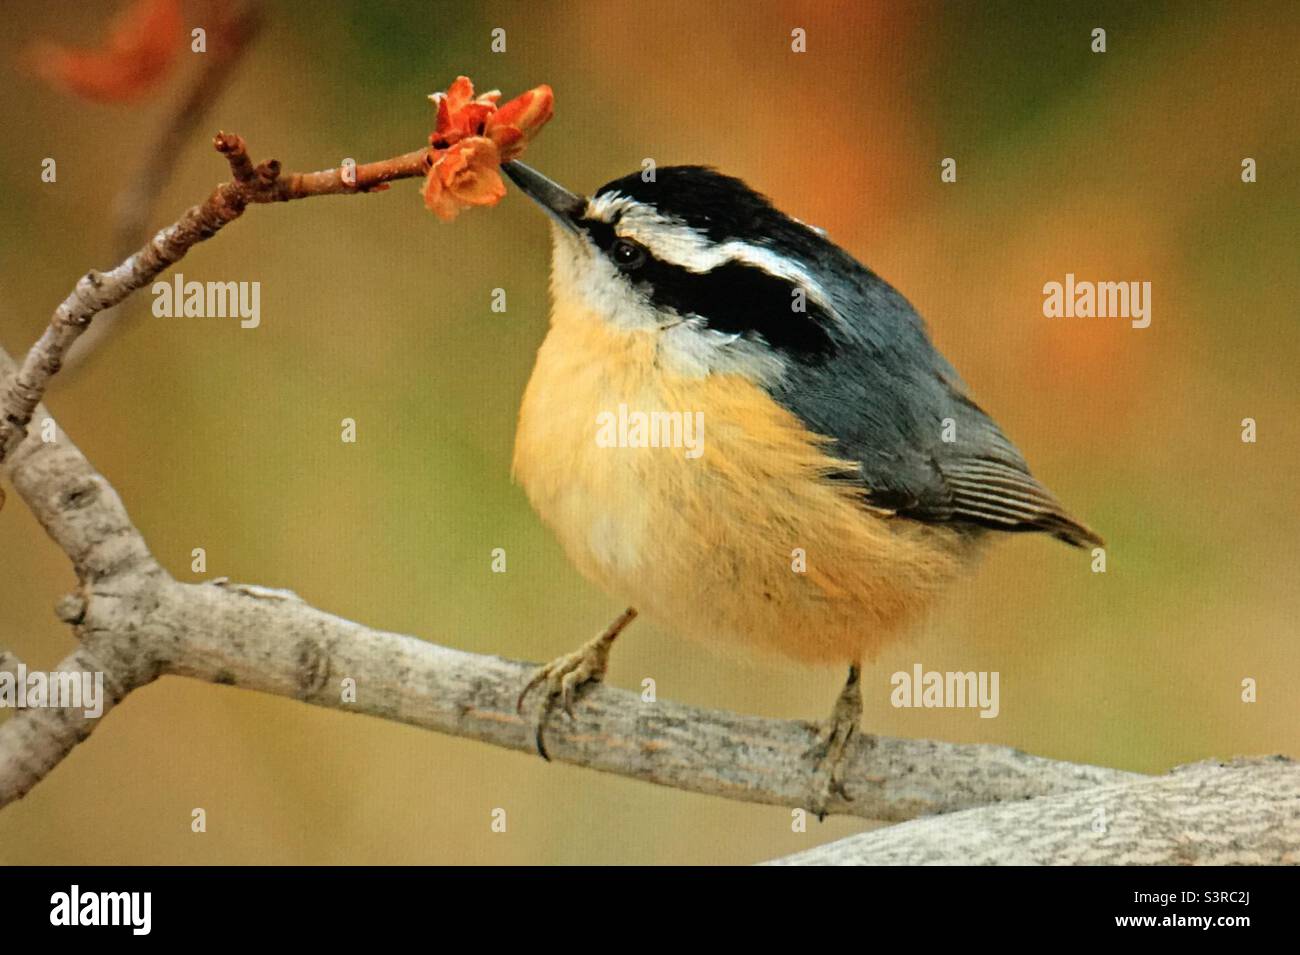 Backyard photography, North American , birds, Red breasted nuthatch, wildlife. Stock Photo